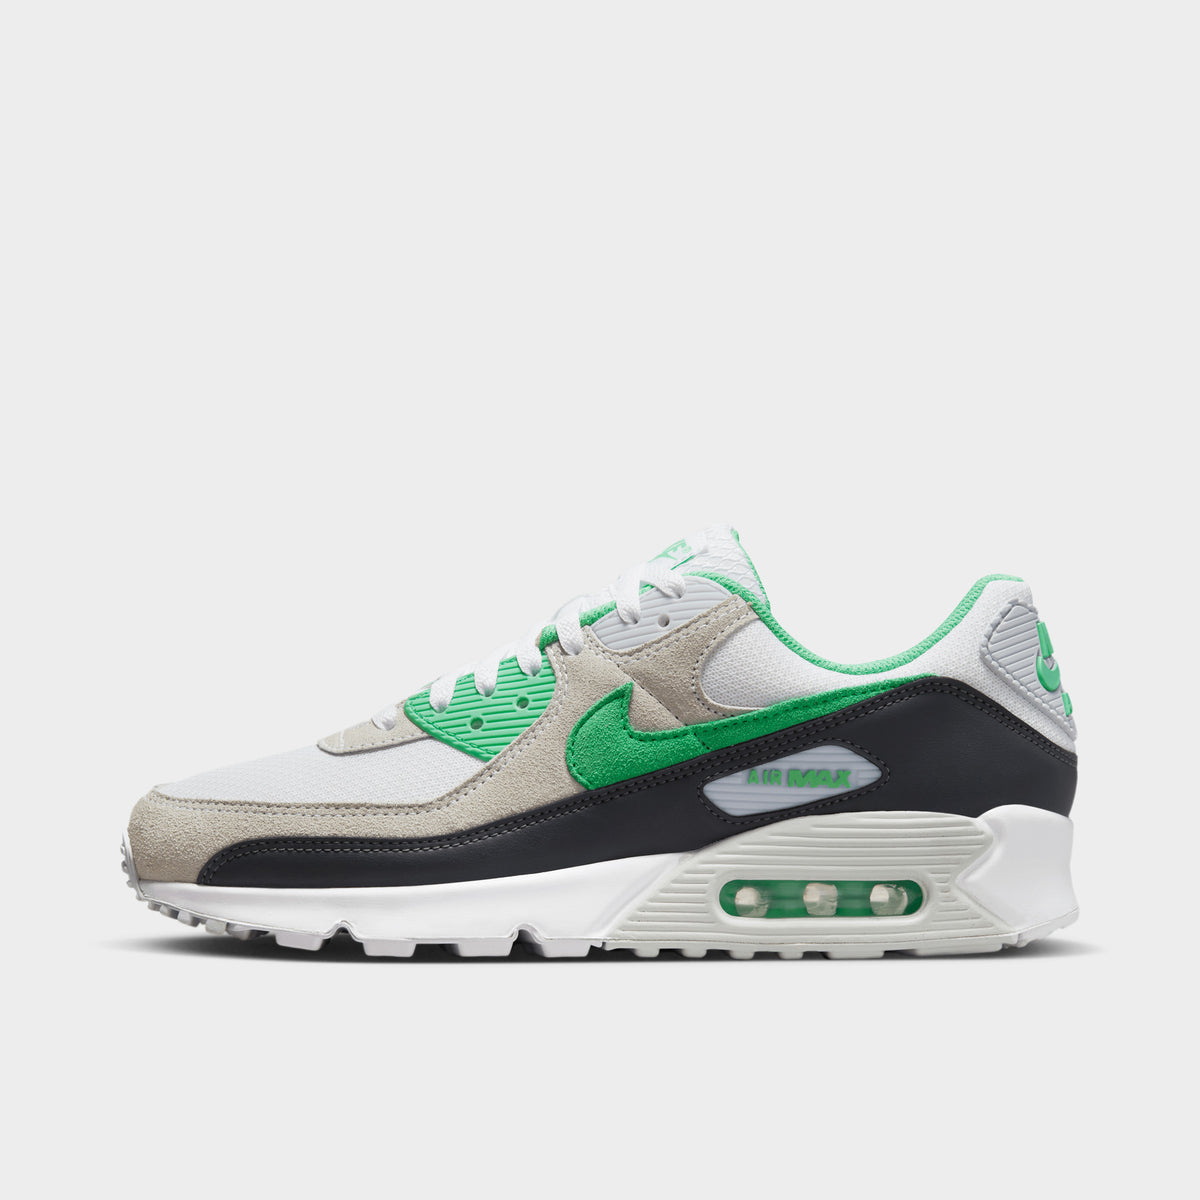 Nike Air Max 90 White / Spring Green - Anthracite | JD Sports